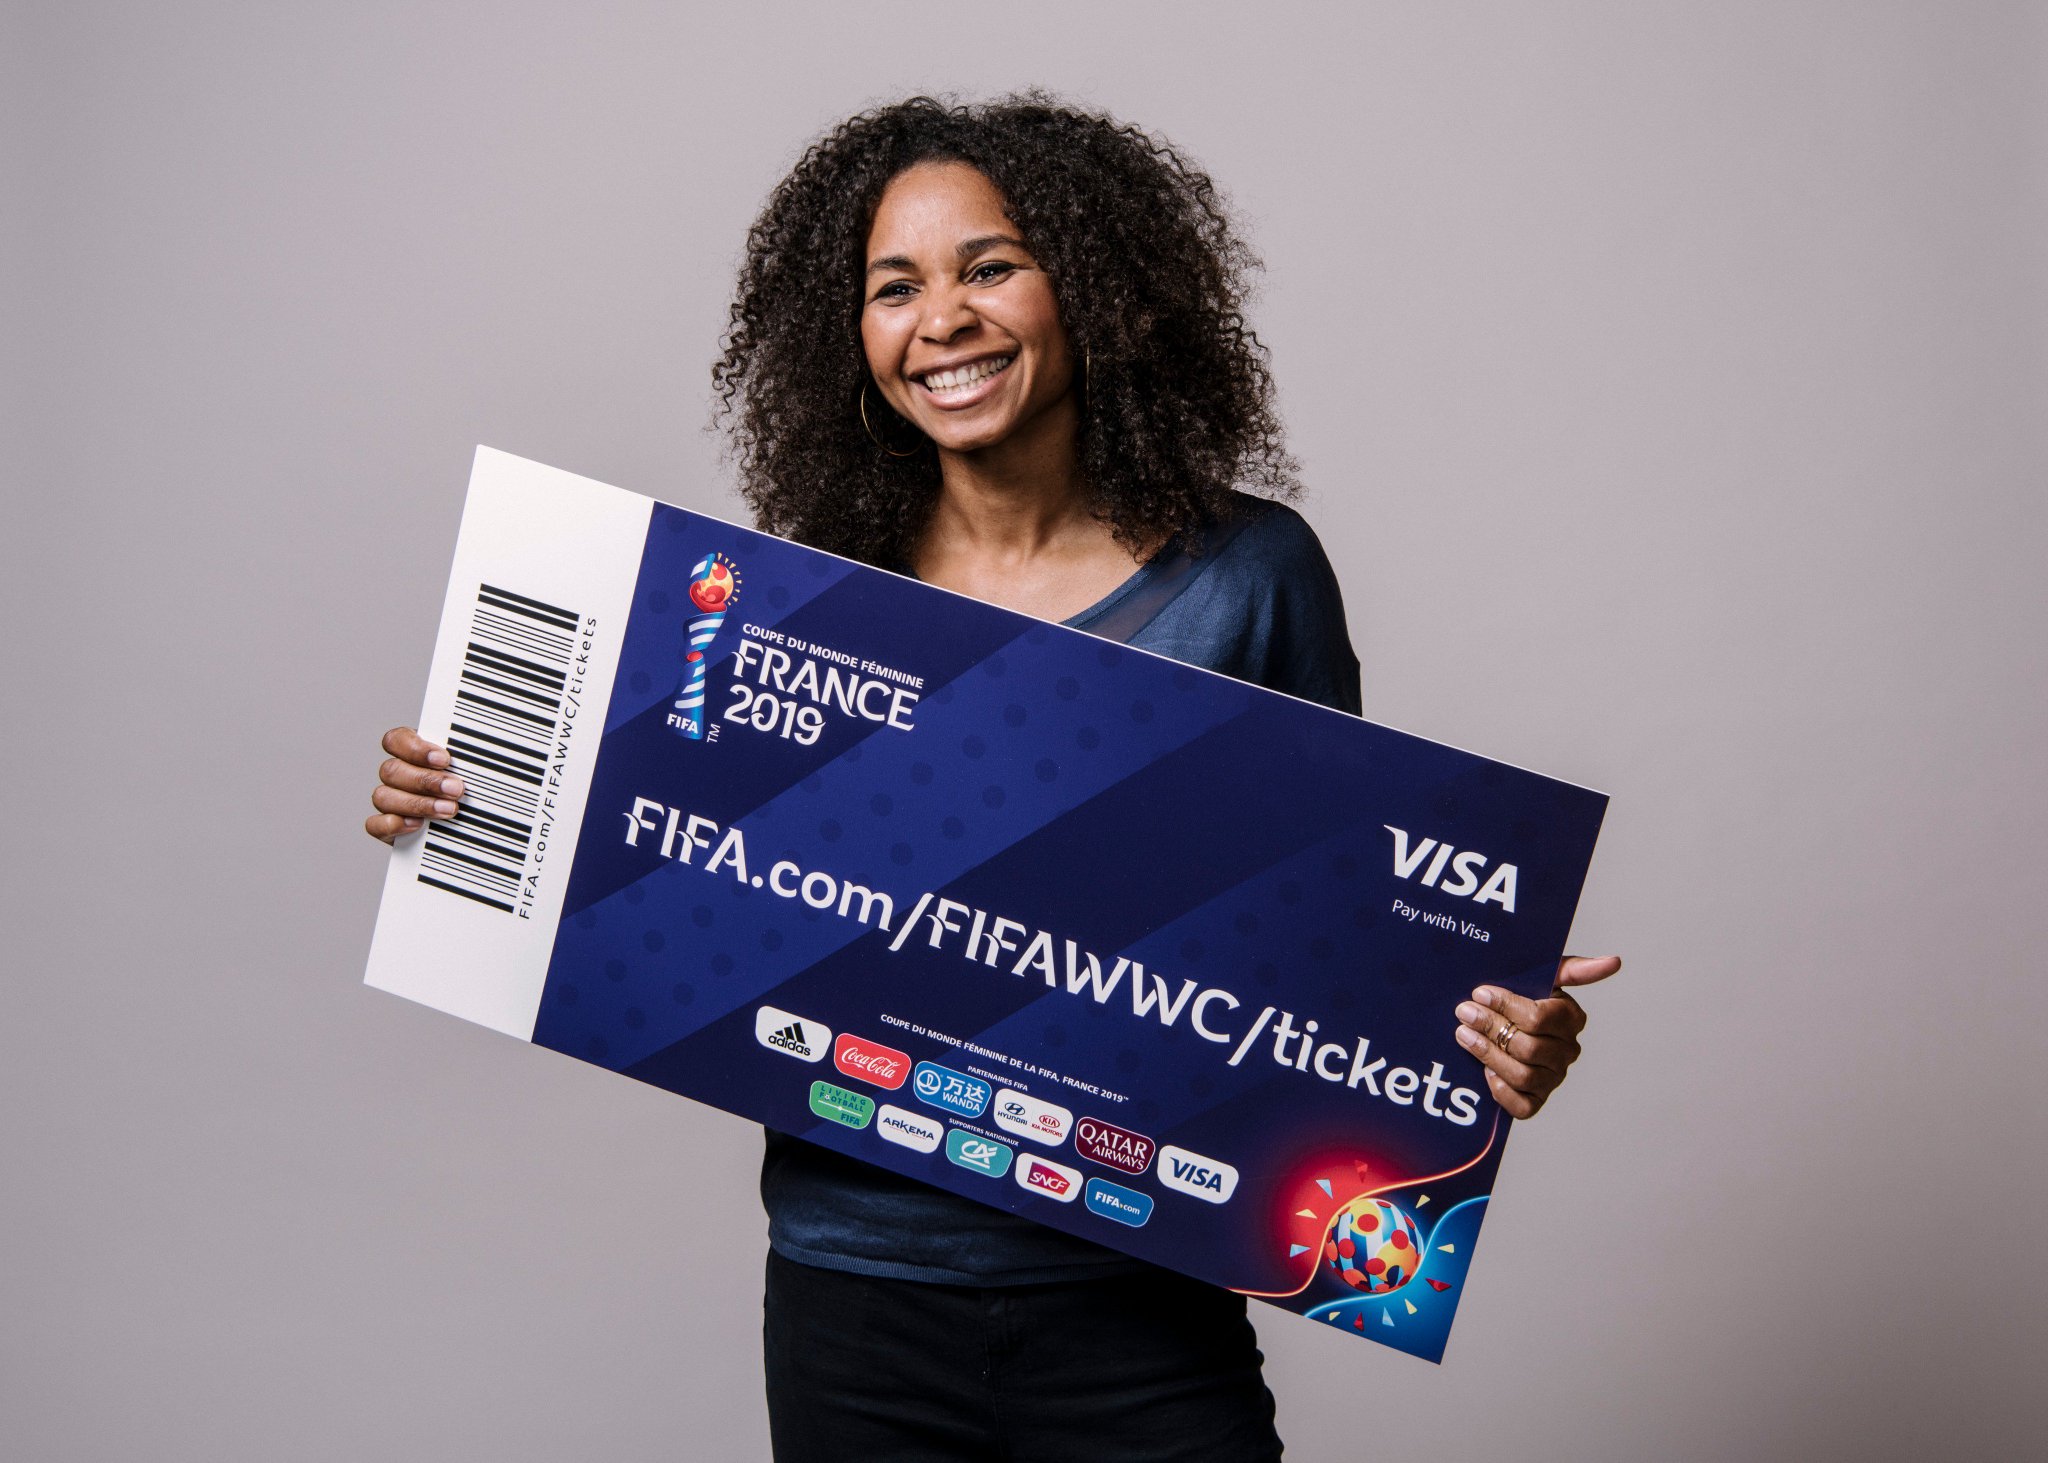 FIFA Women's World Cup 🇫🇷 on Twitter "🔊 45,000 #FIFAWWC tickets have